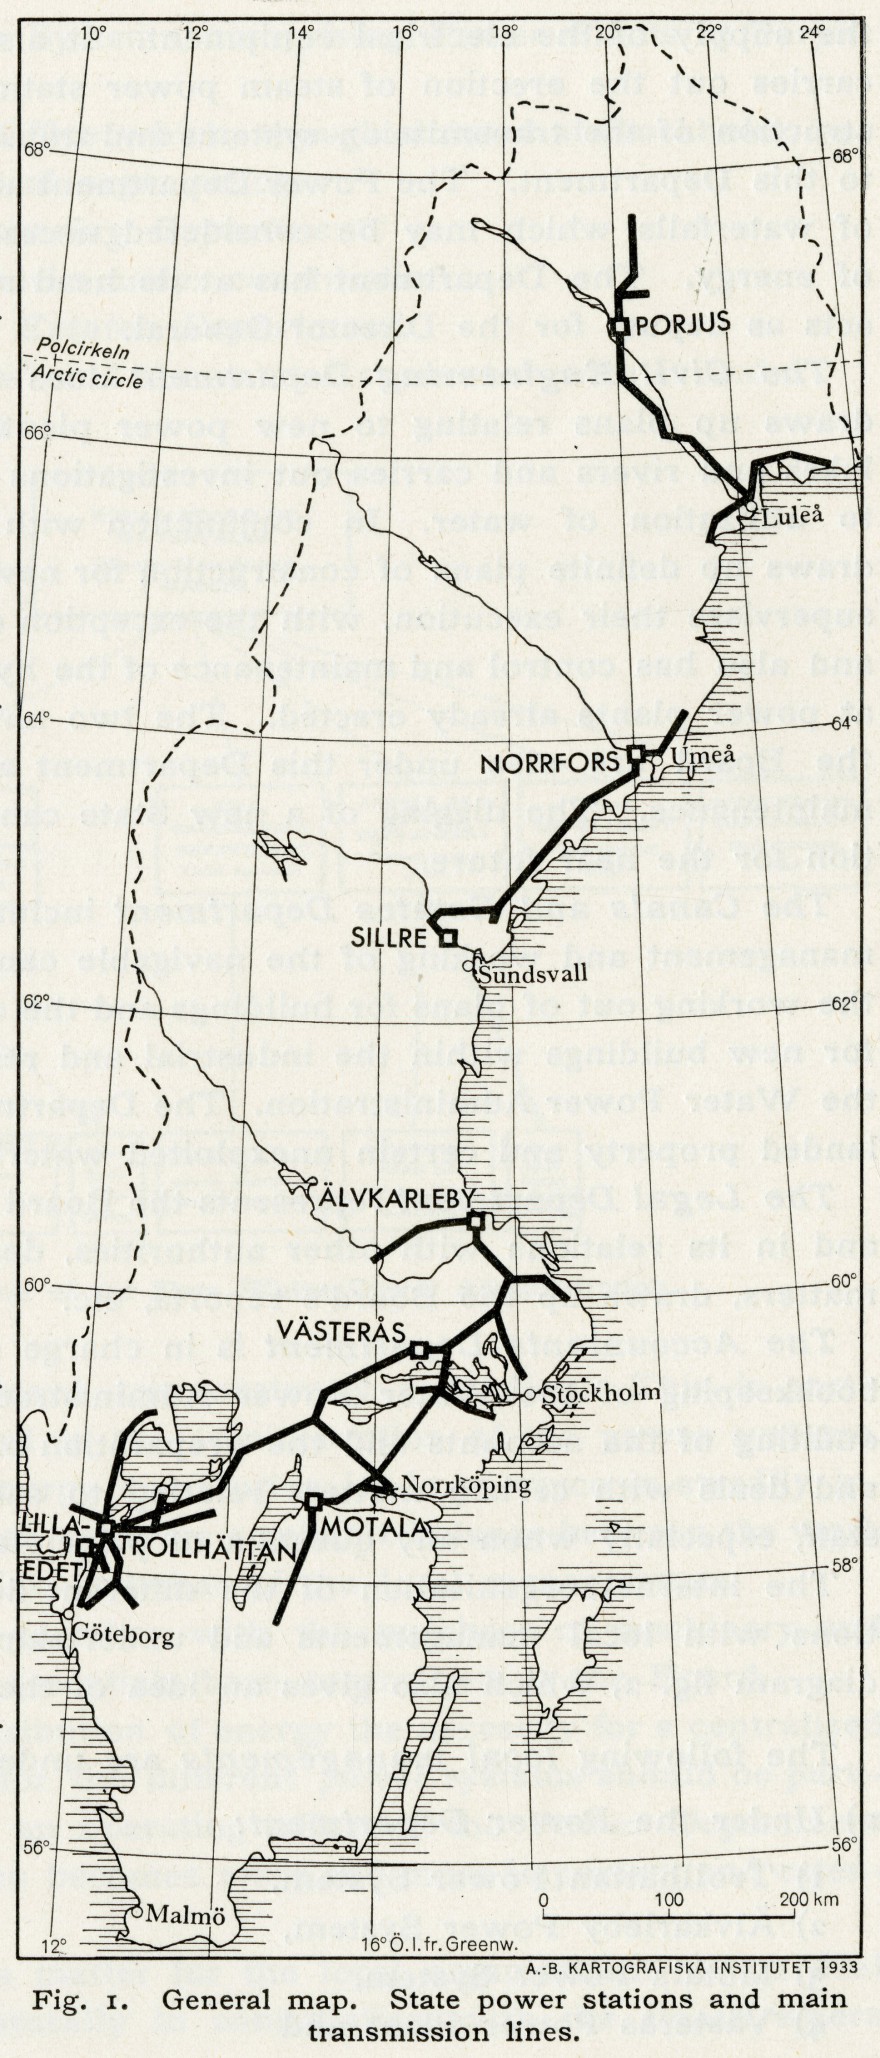 A map of Vattenfall's power stations and main transmission lines in 1933